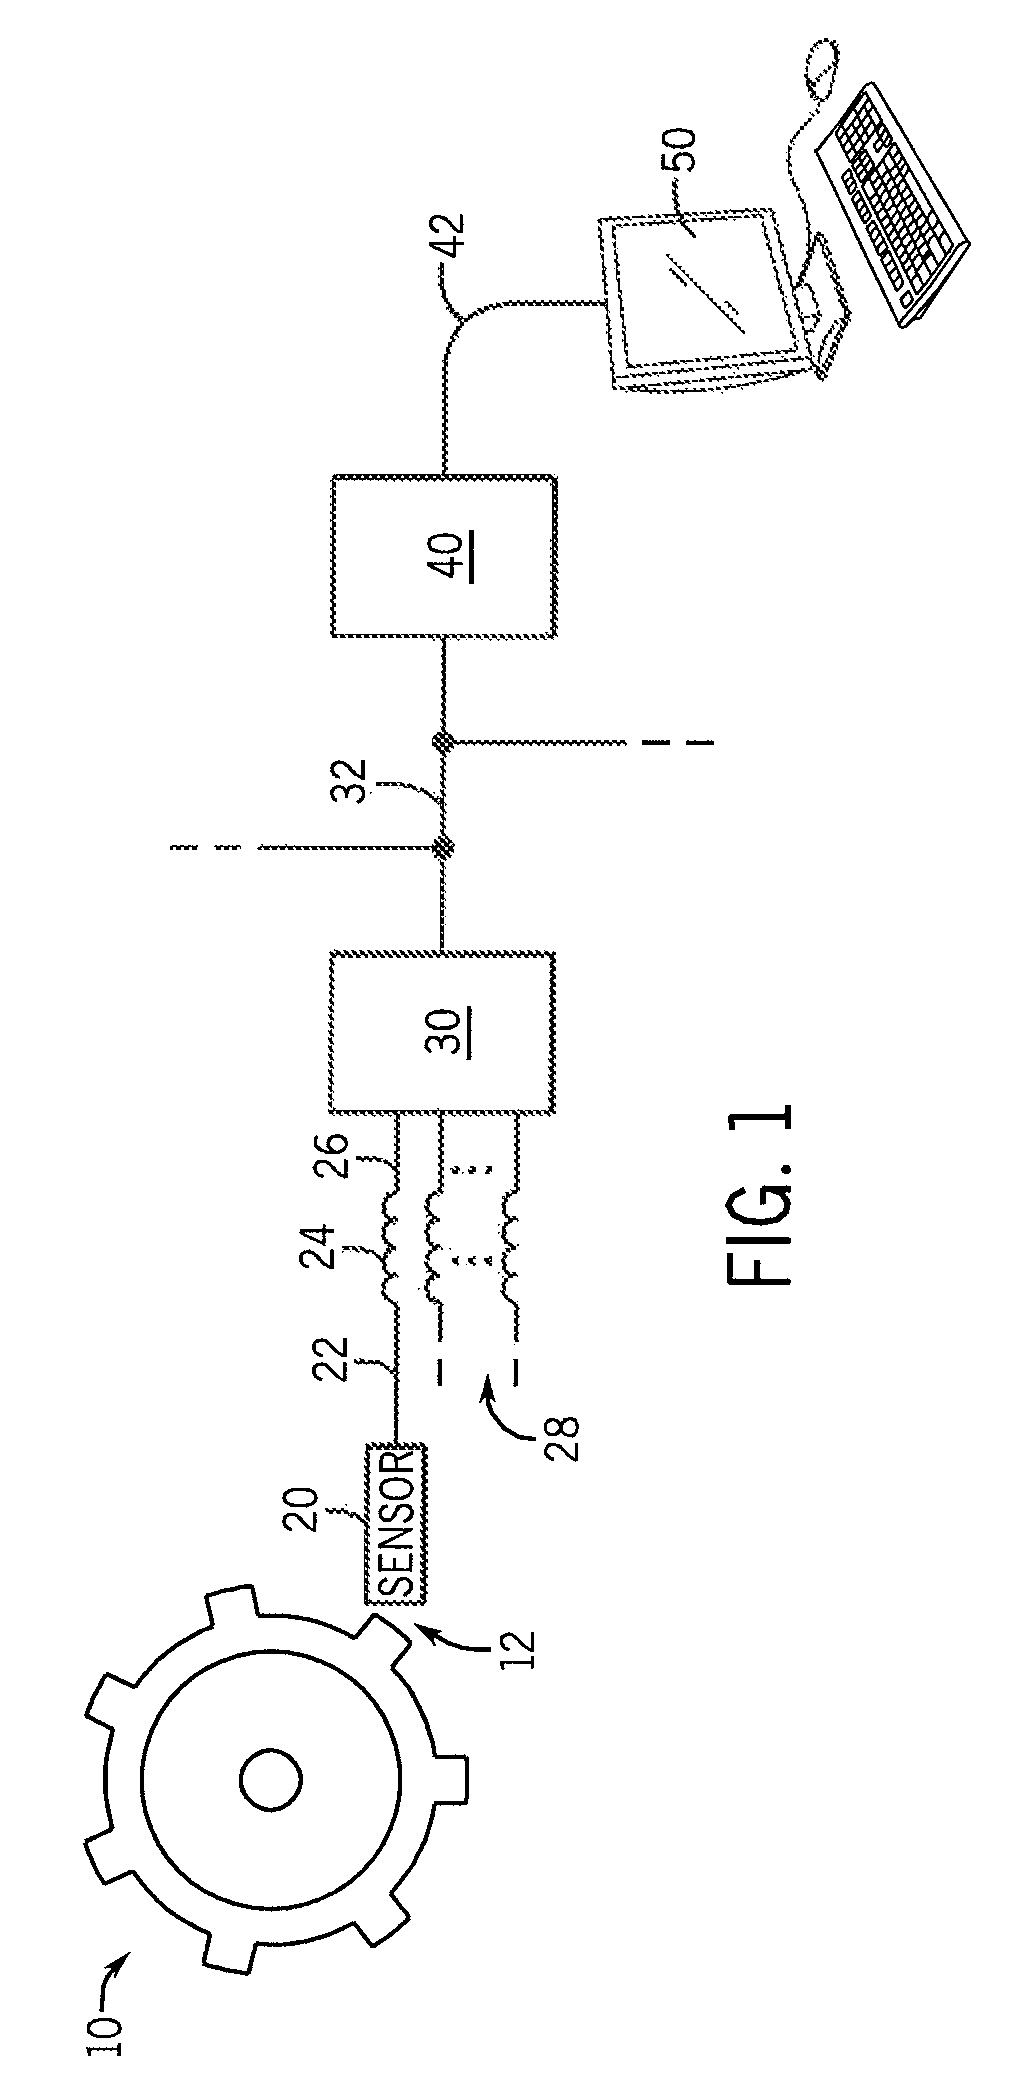 Adaptive threshold voltage for frequency input modules